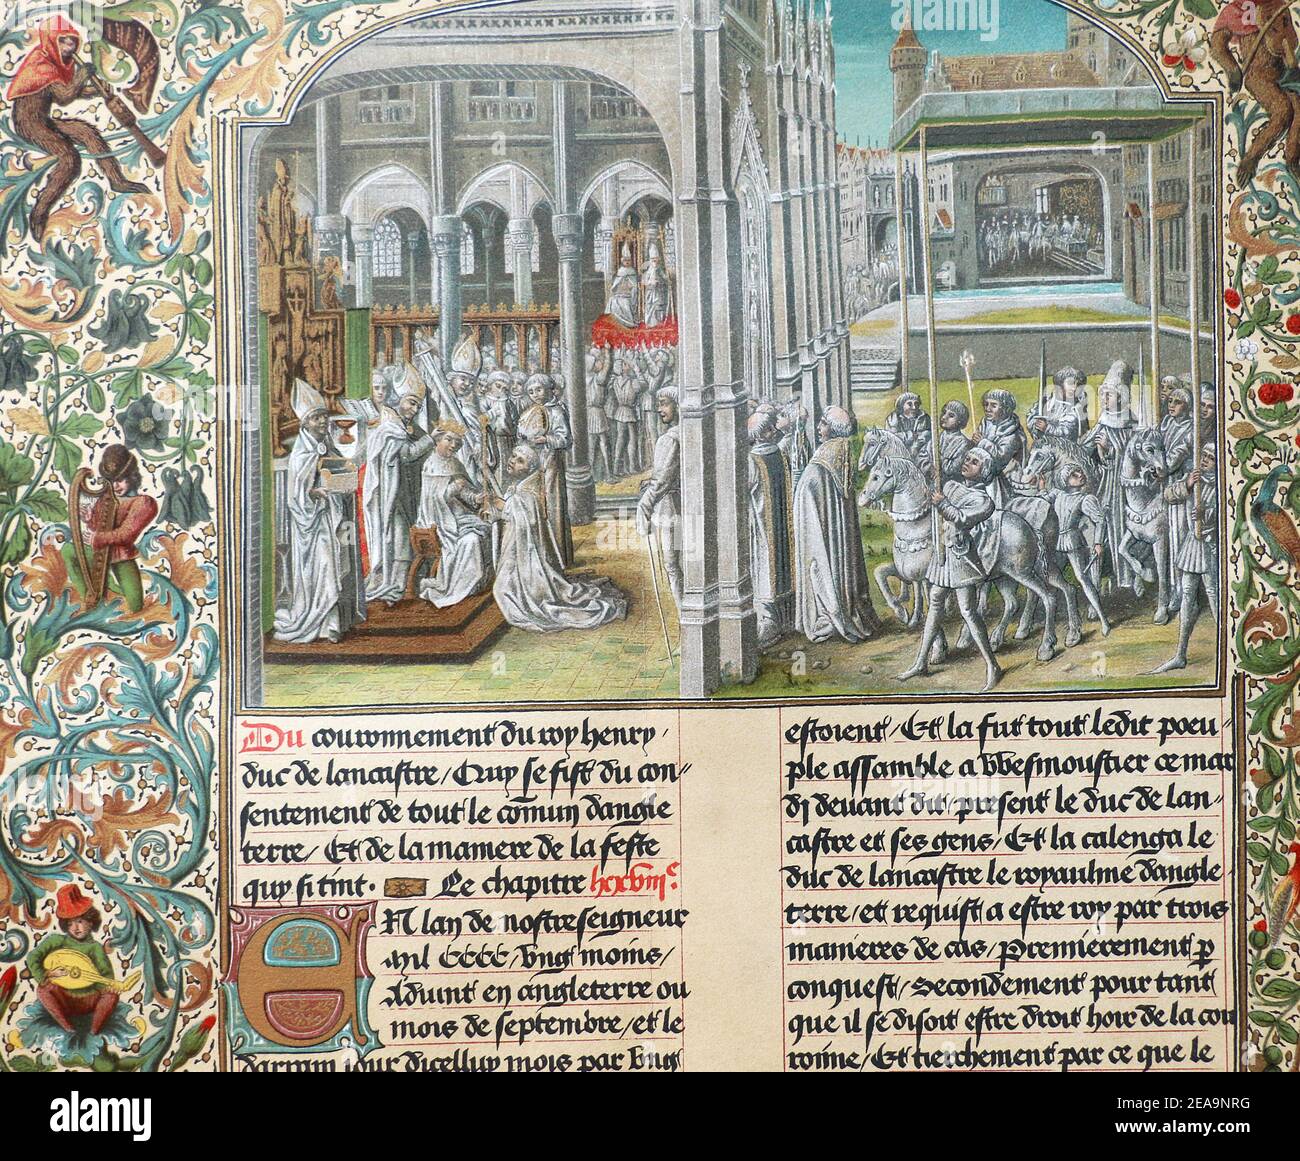 Coronation of King Henry IV of England. Image from manuscript of the 15th century. Stock Photo